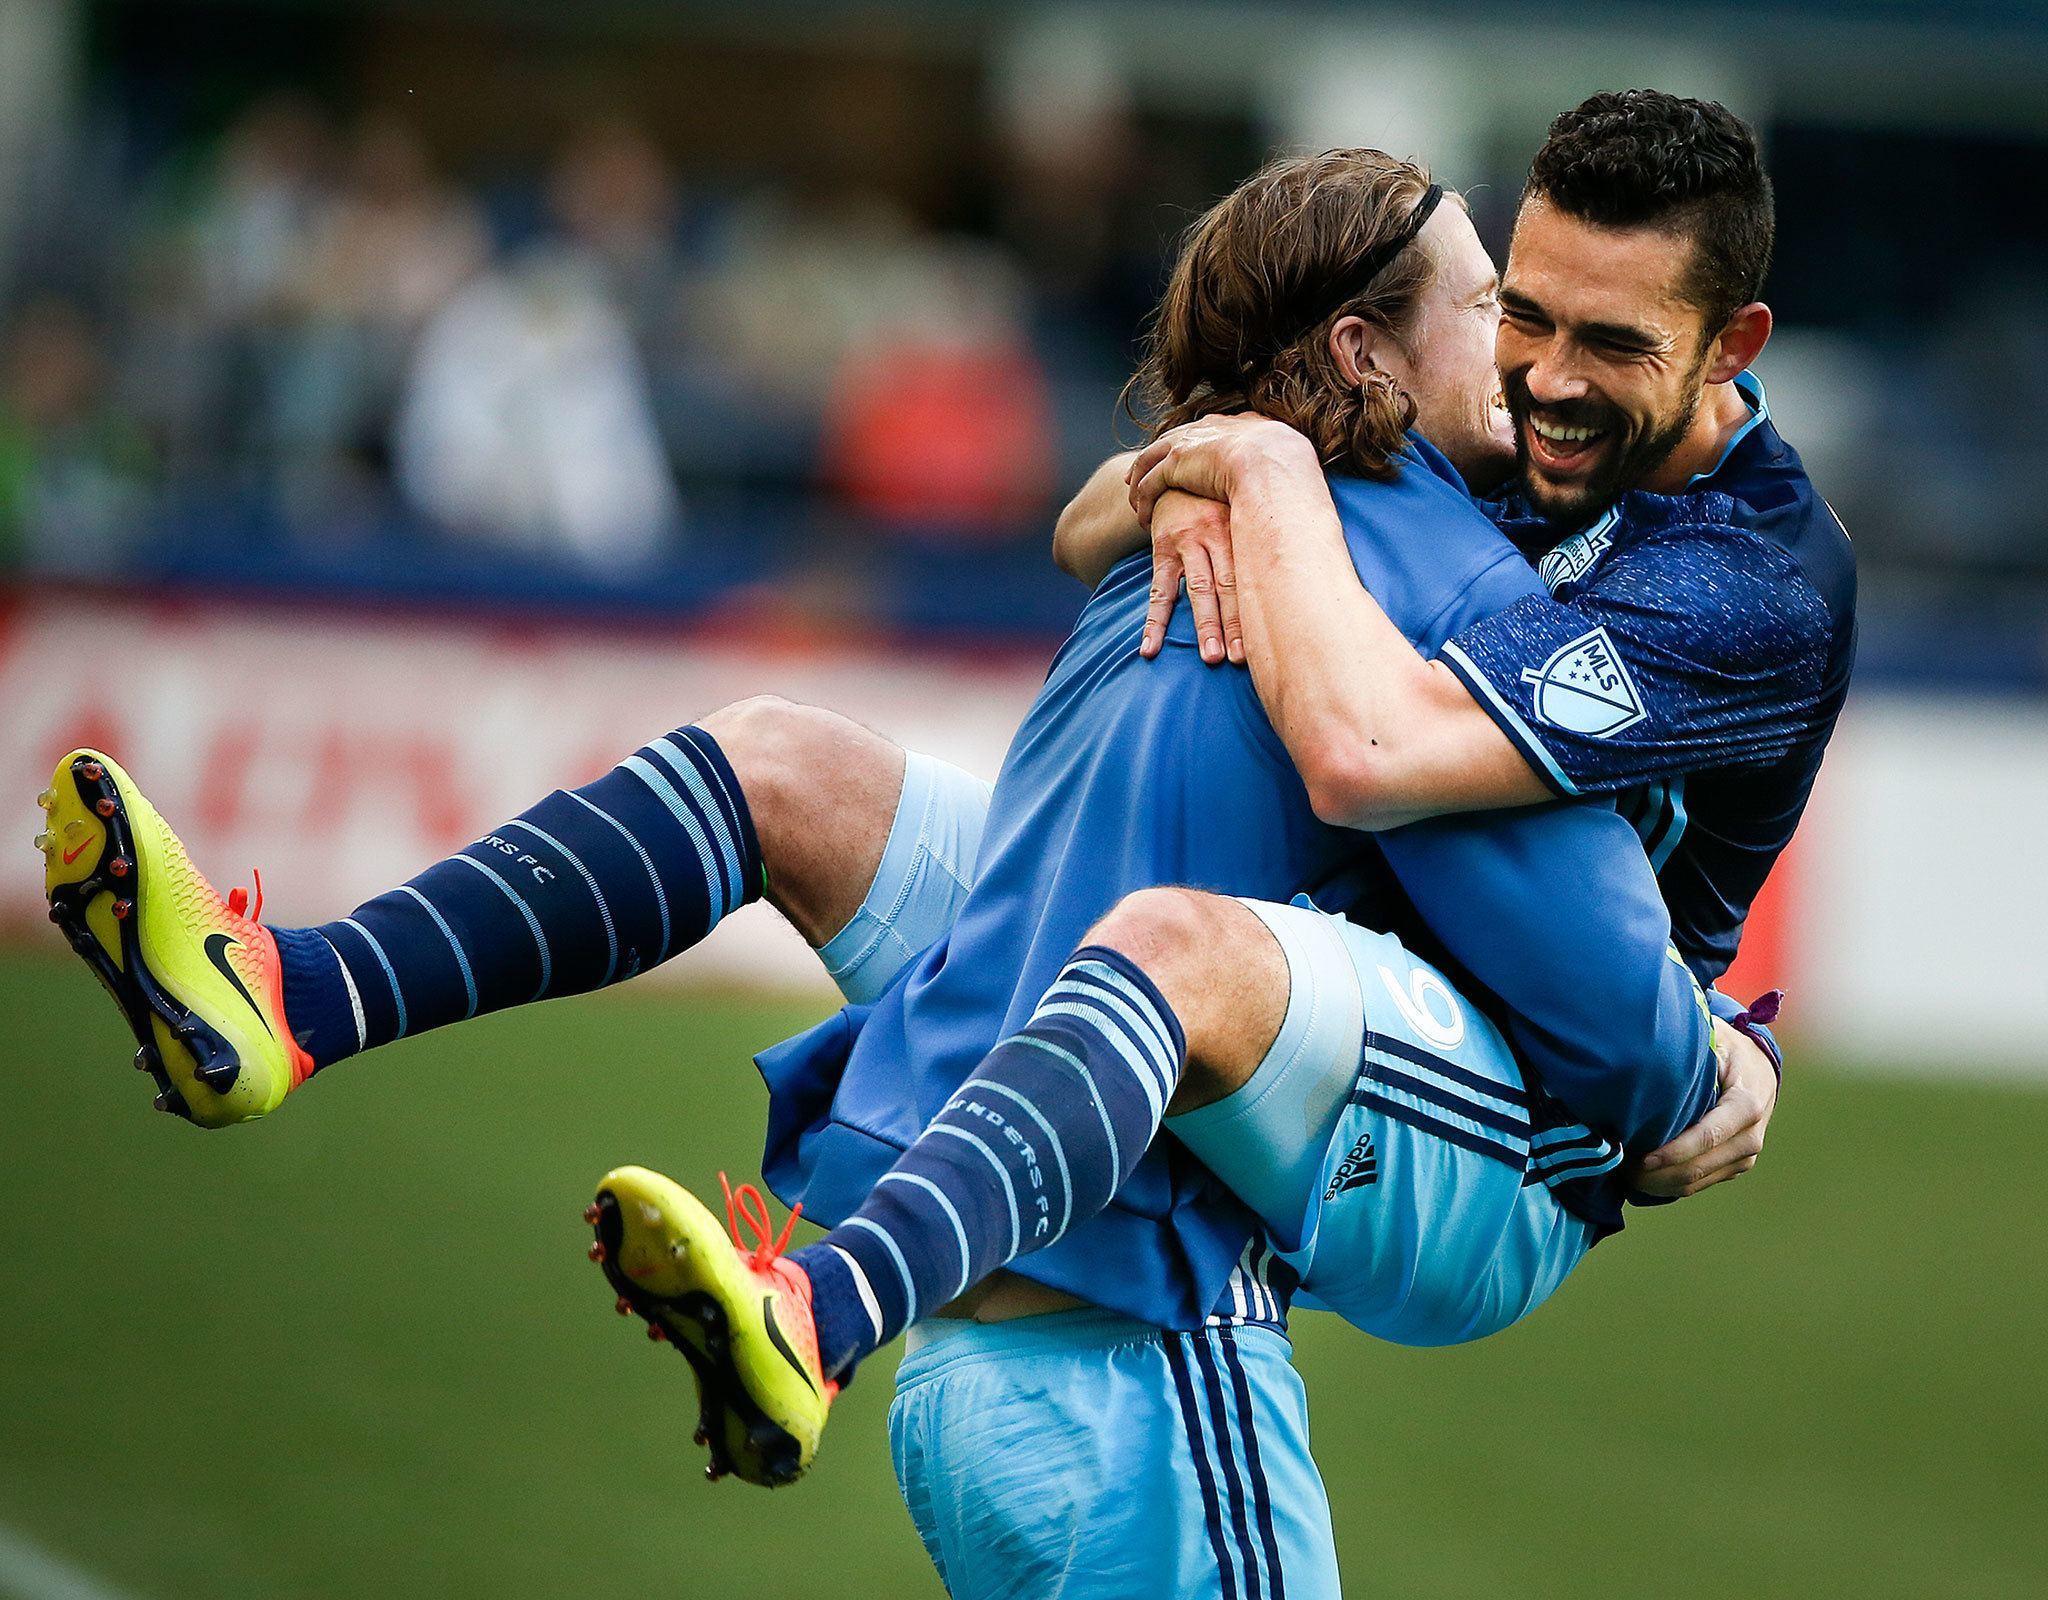 Sounders forward Herculez Gomez (right) leaps into the arms of teammate Erik Friberg after scoring on a penalty kick during aninternational friendly against West Ham United on Tuesday at CenturyLink Field in Seattle. The Sounders won 3-0. (Ian Terry / The Herald)